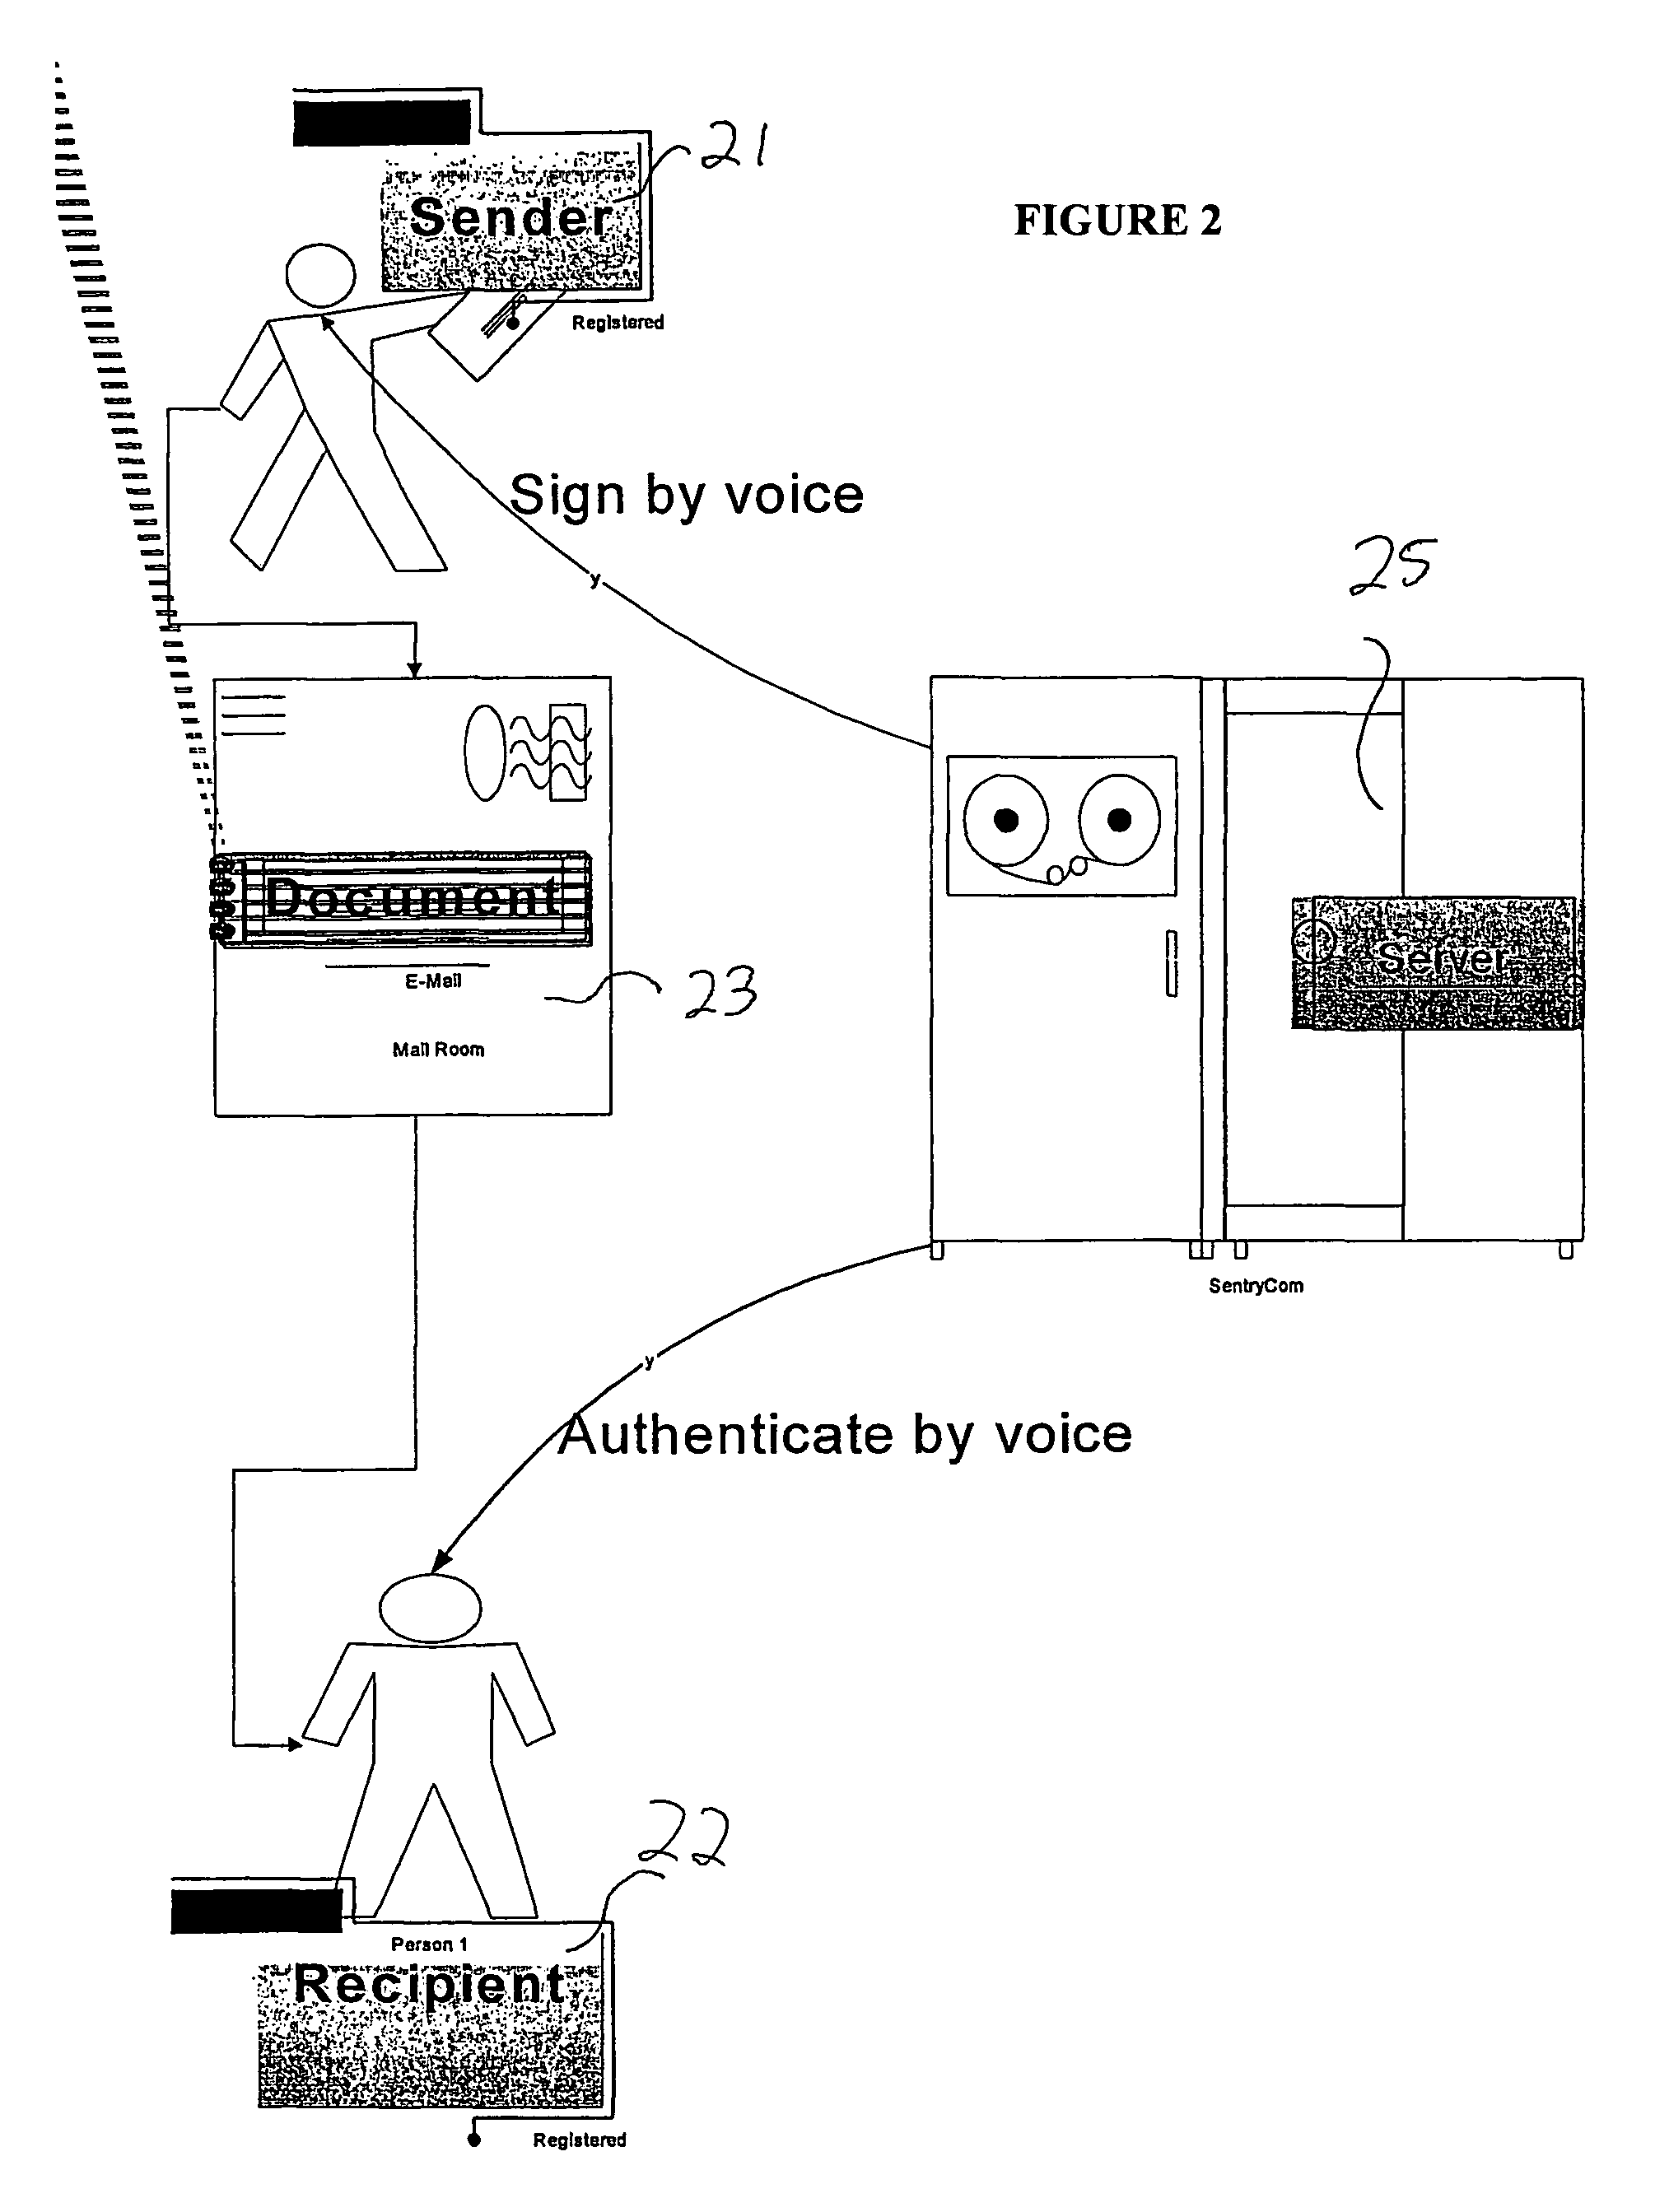 Biometric-based system and method for enabling authentication of electronic messages sent over a network